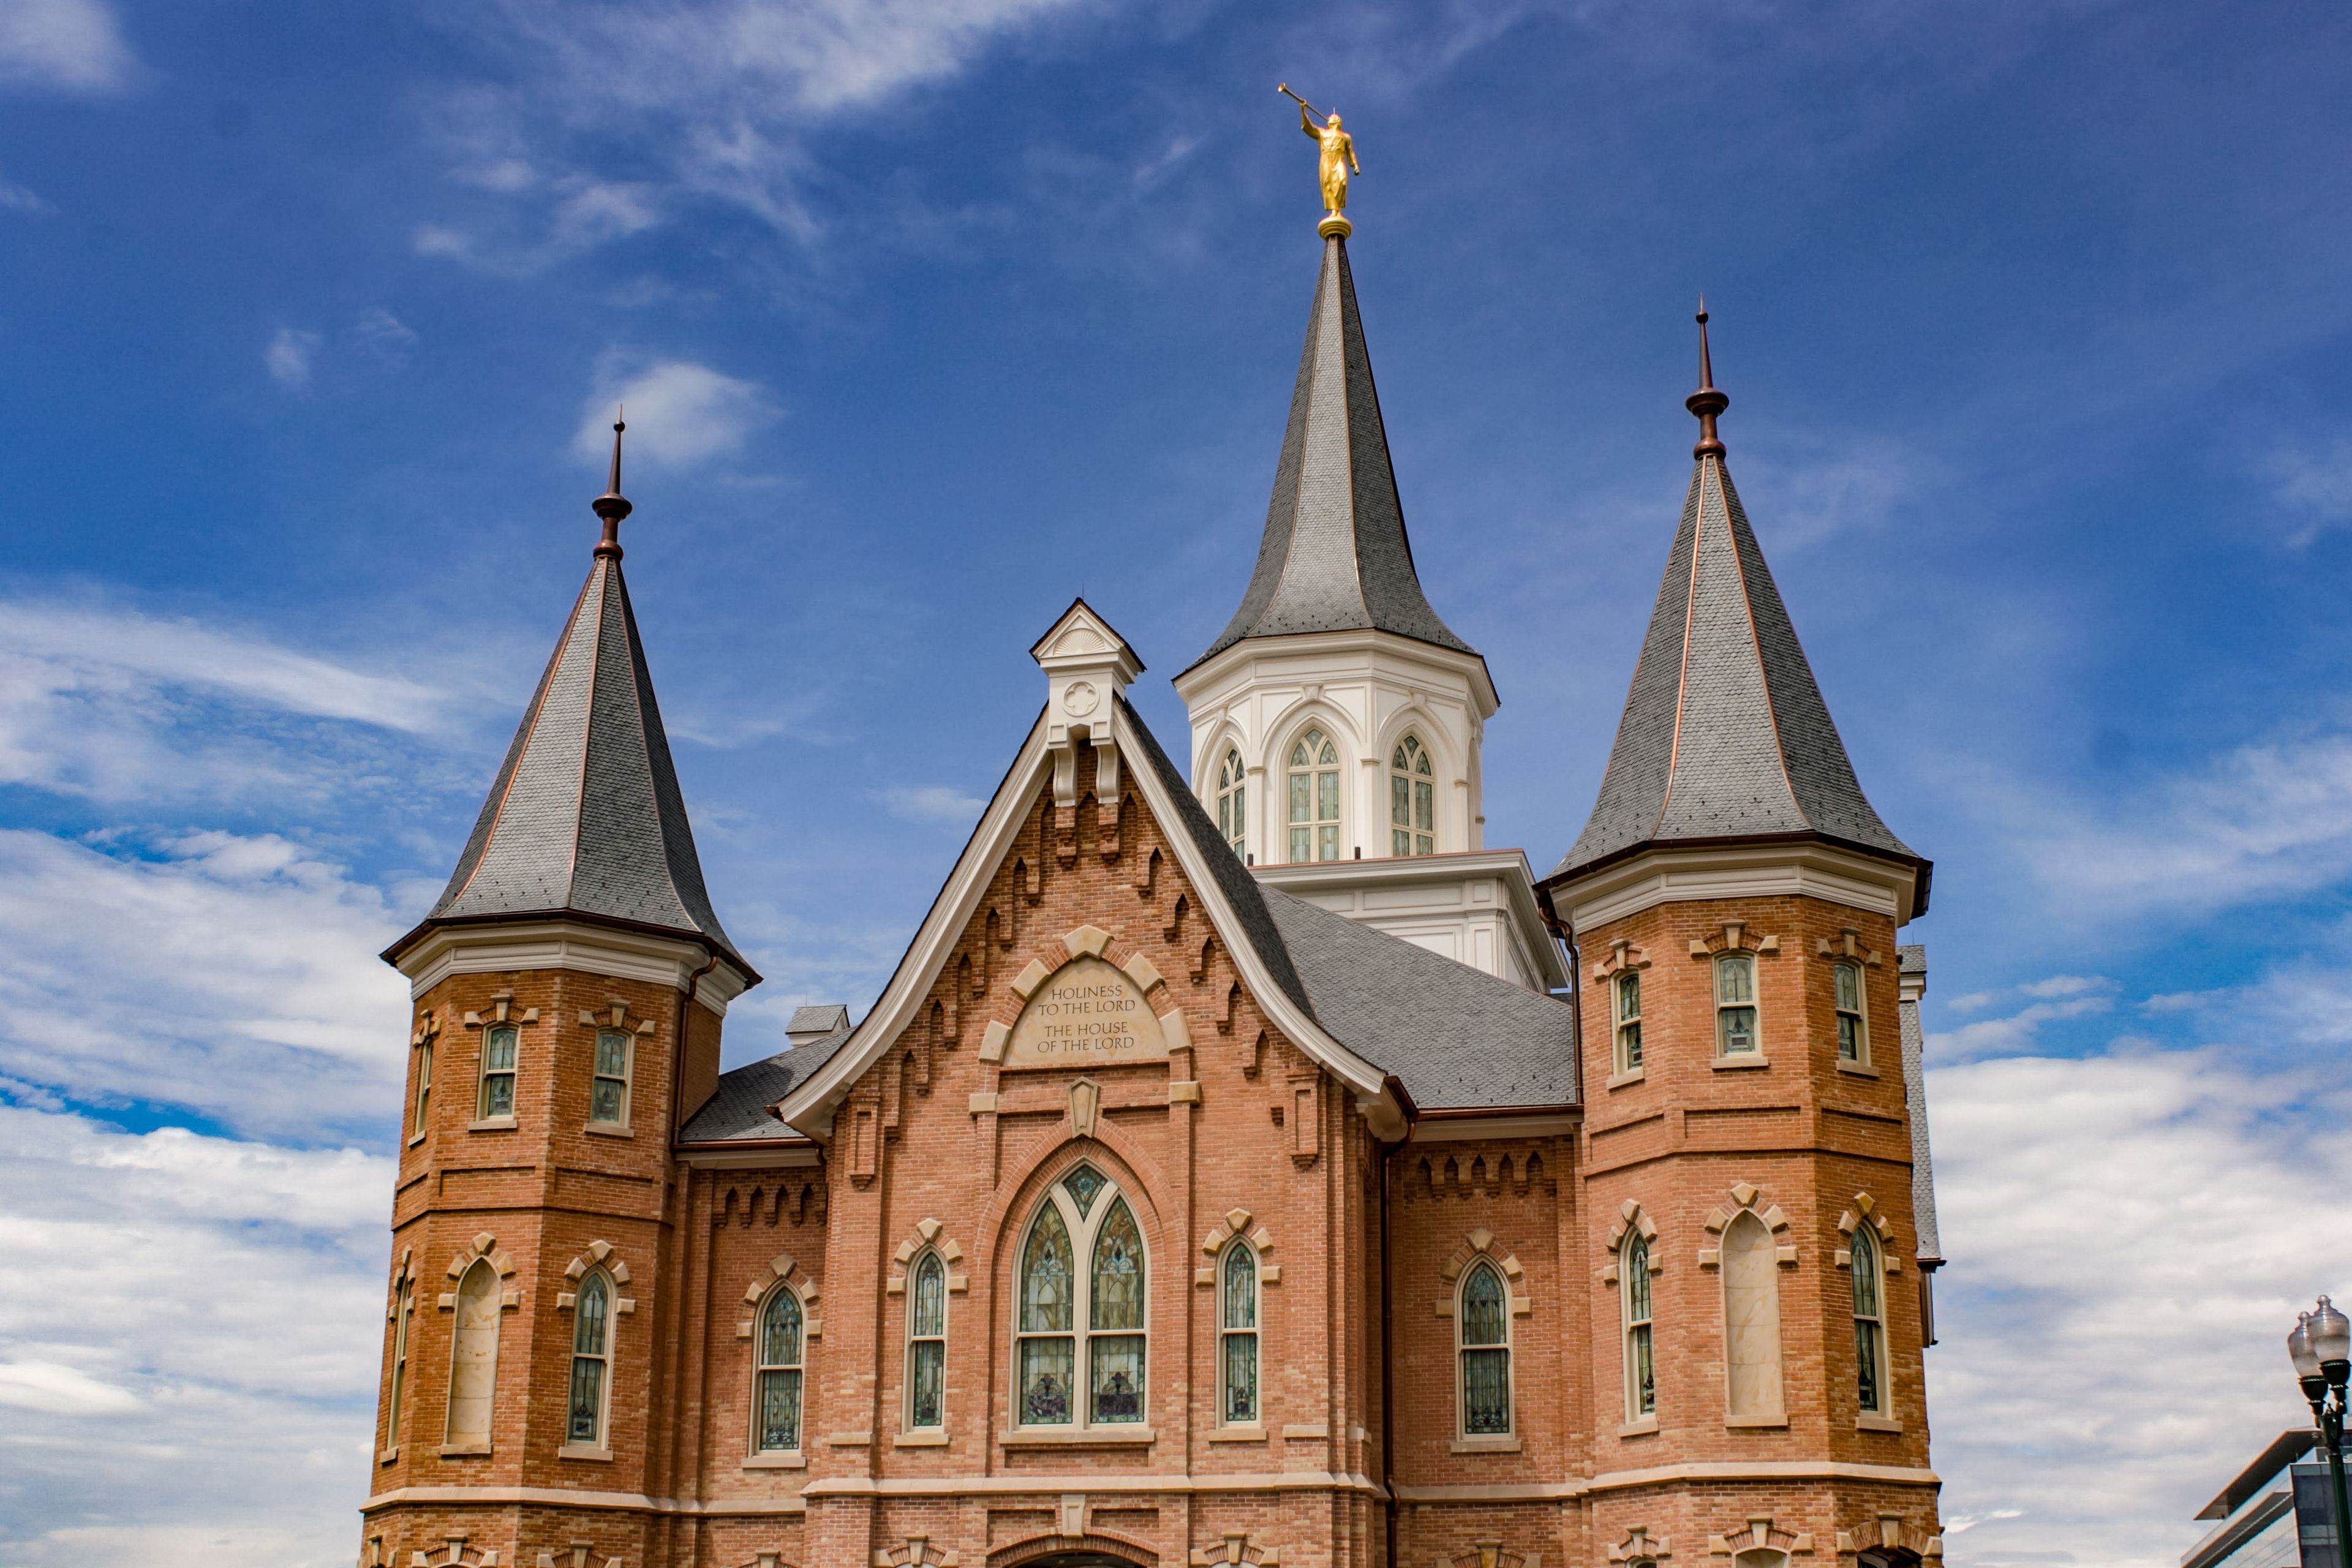 A front view of the Provo City Center Temple during the day.